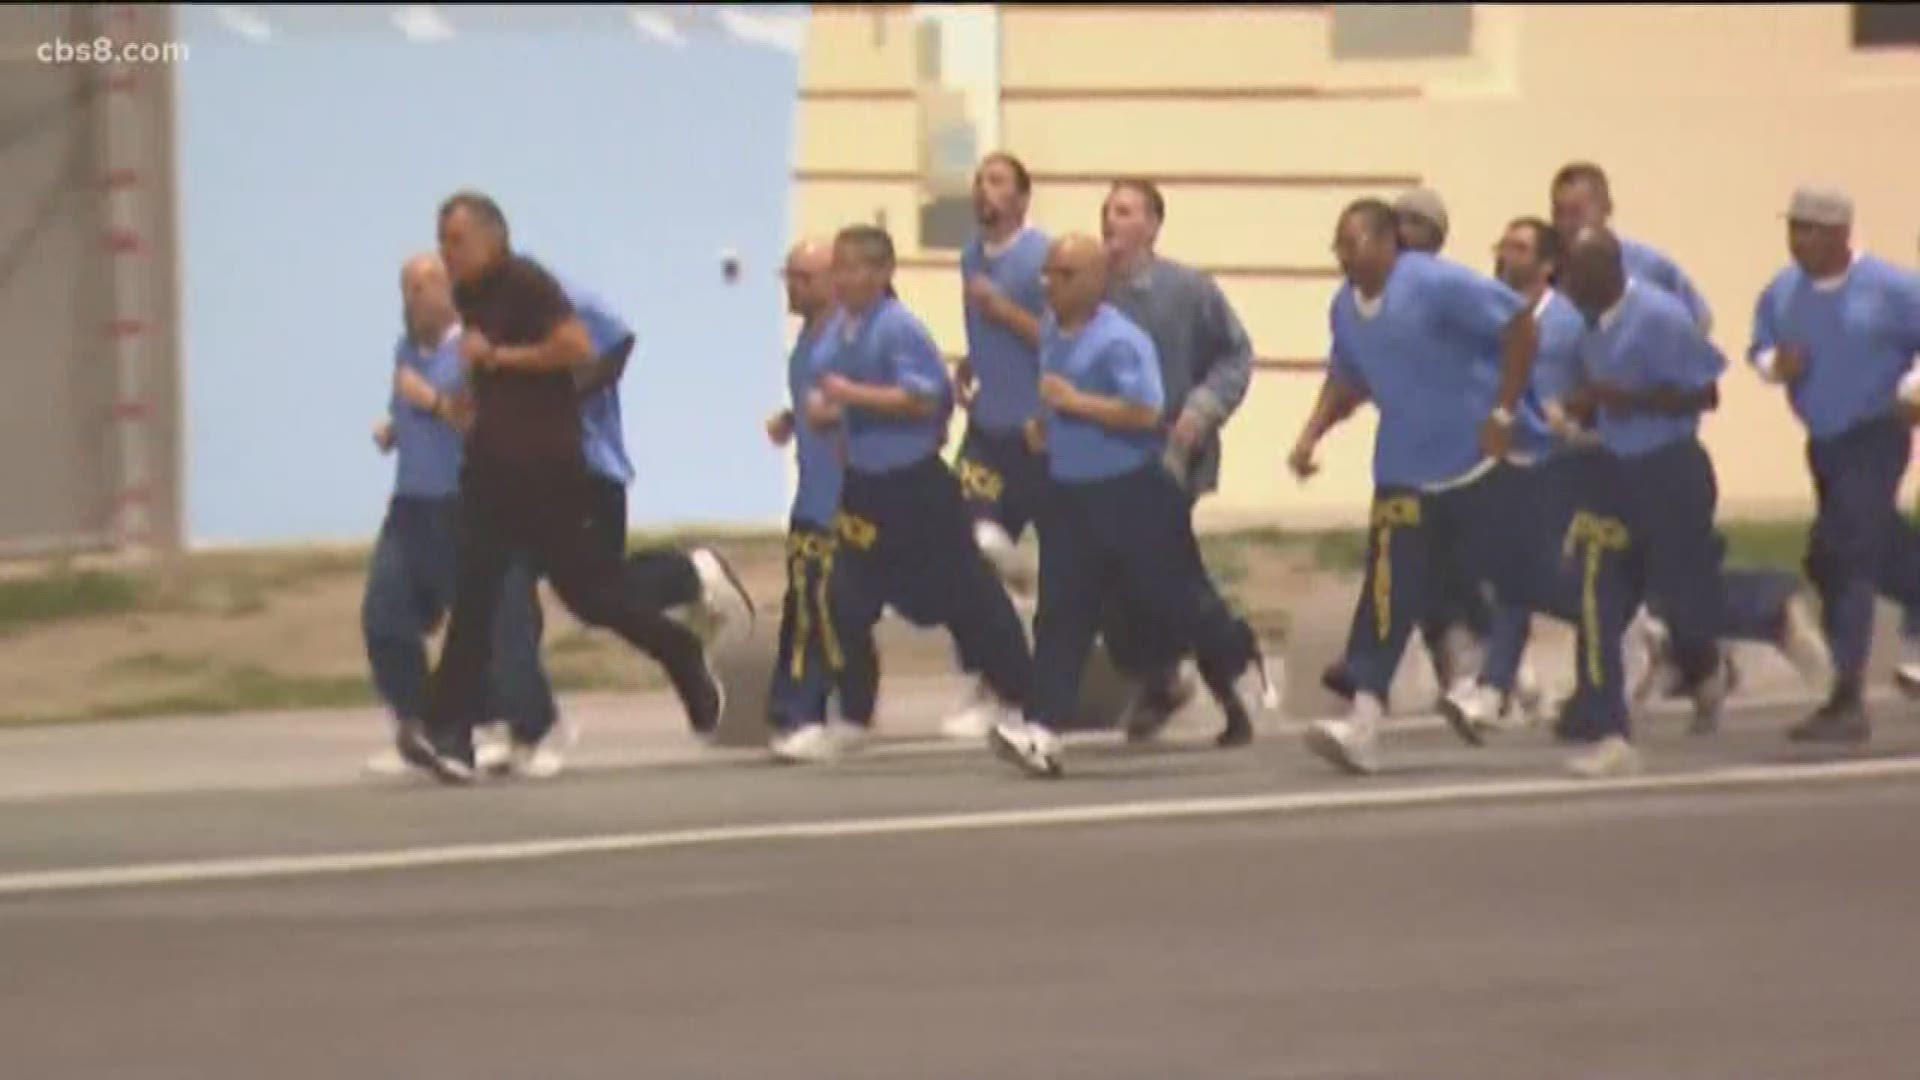 Members of the Skid Row Running Club were featured in a new documentary, which was premiered for inmates at Donovan Correctional Facility.